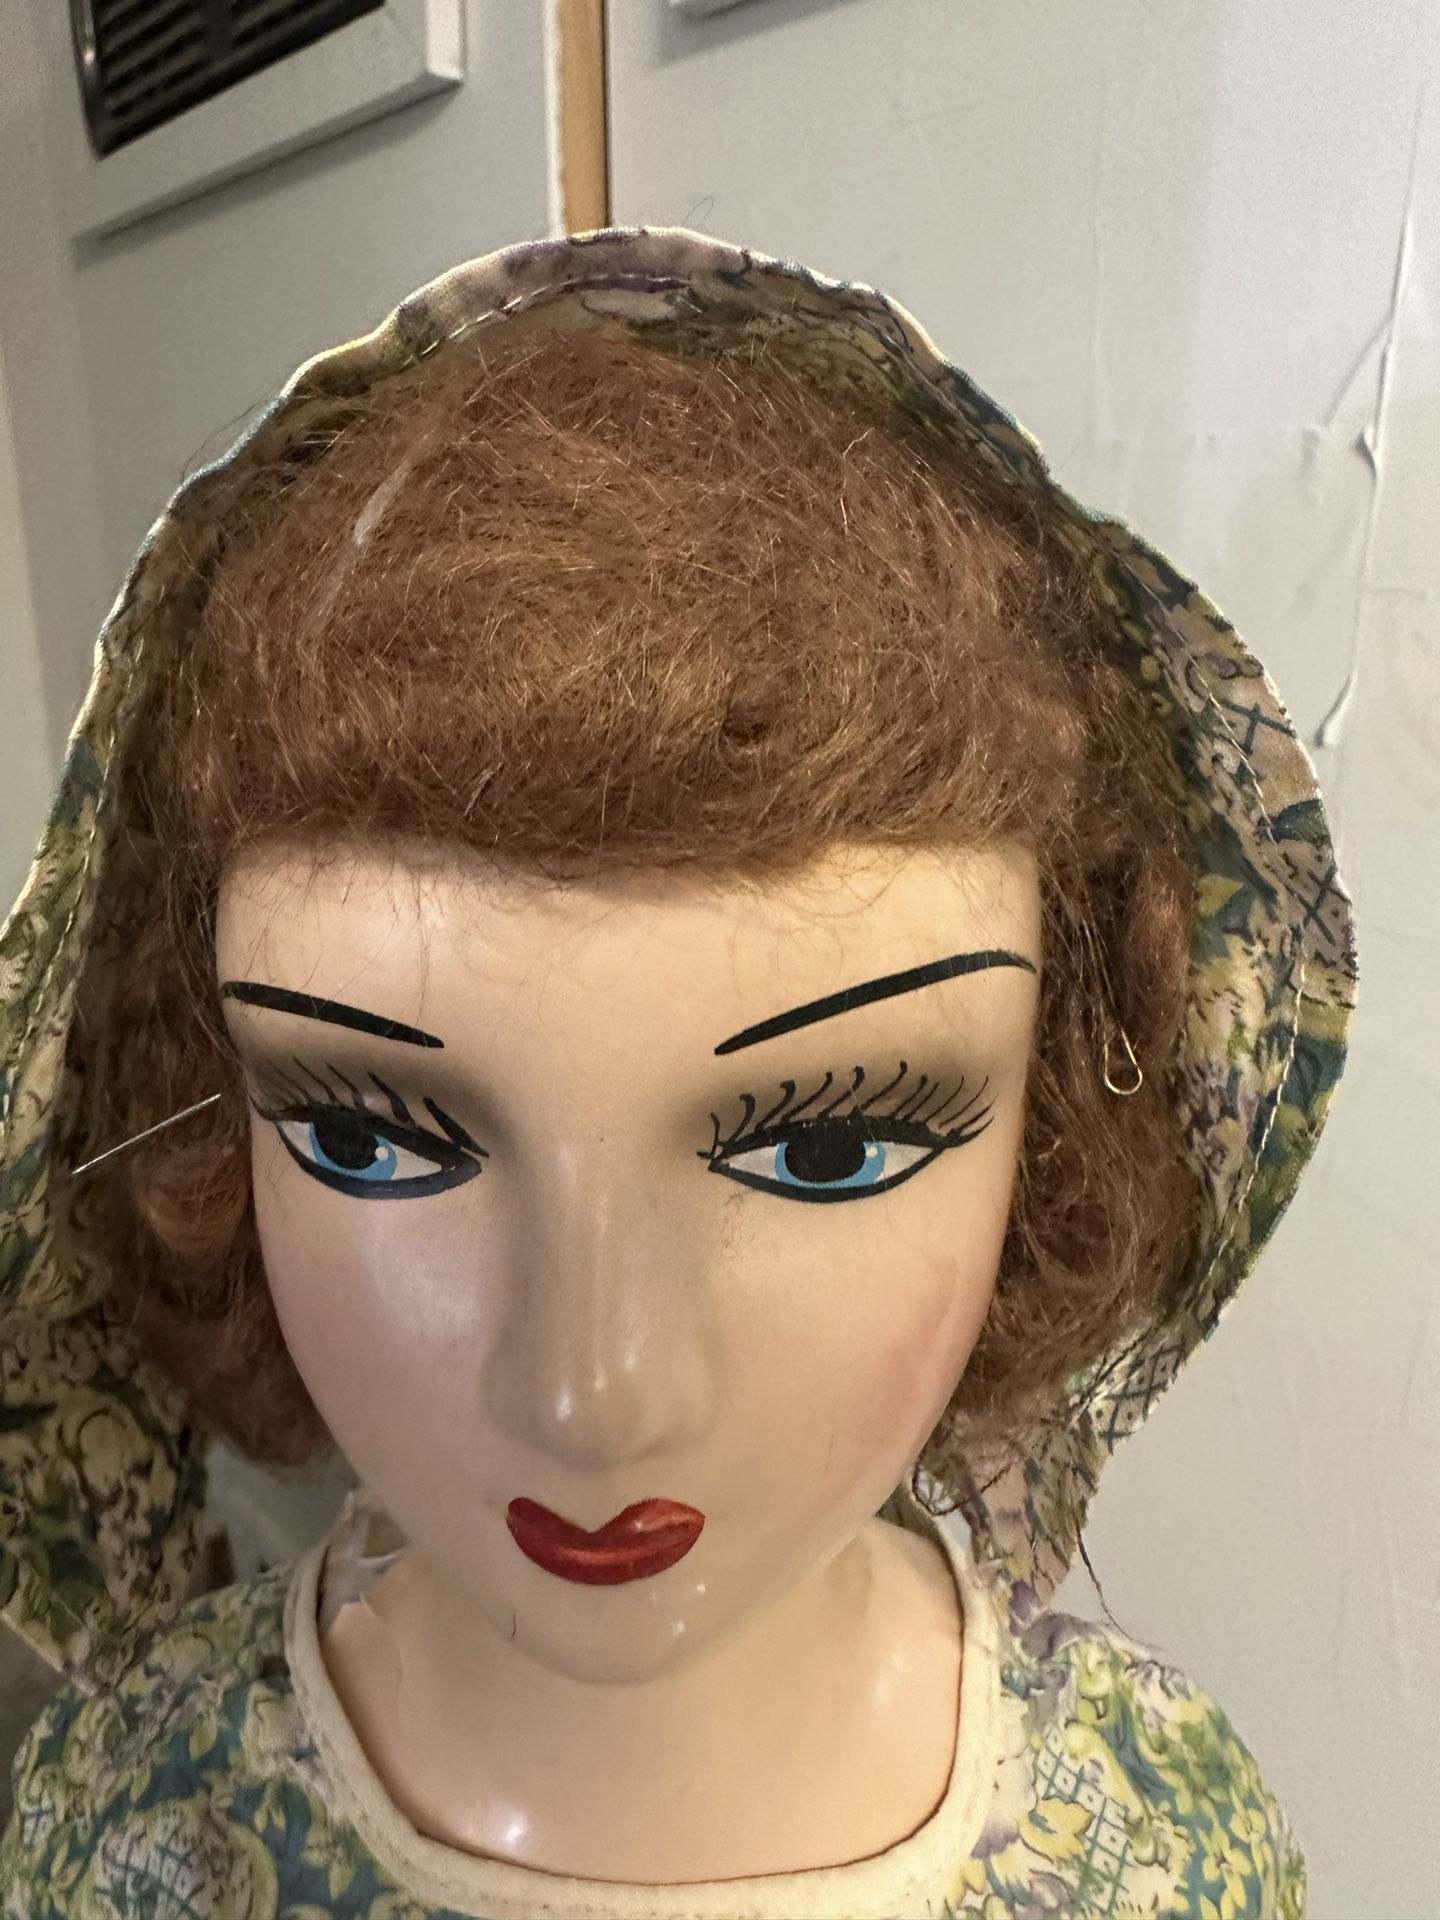 Creepy Haunted “Chernobyl” Doll For Sale 